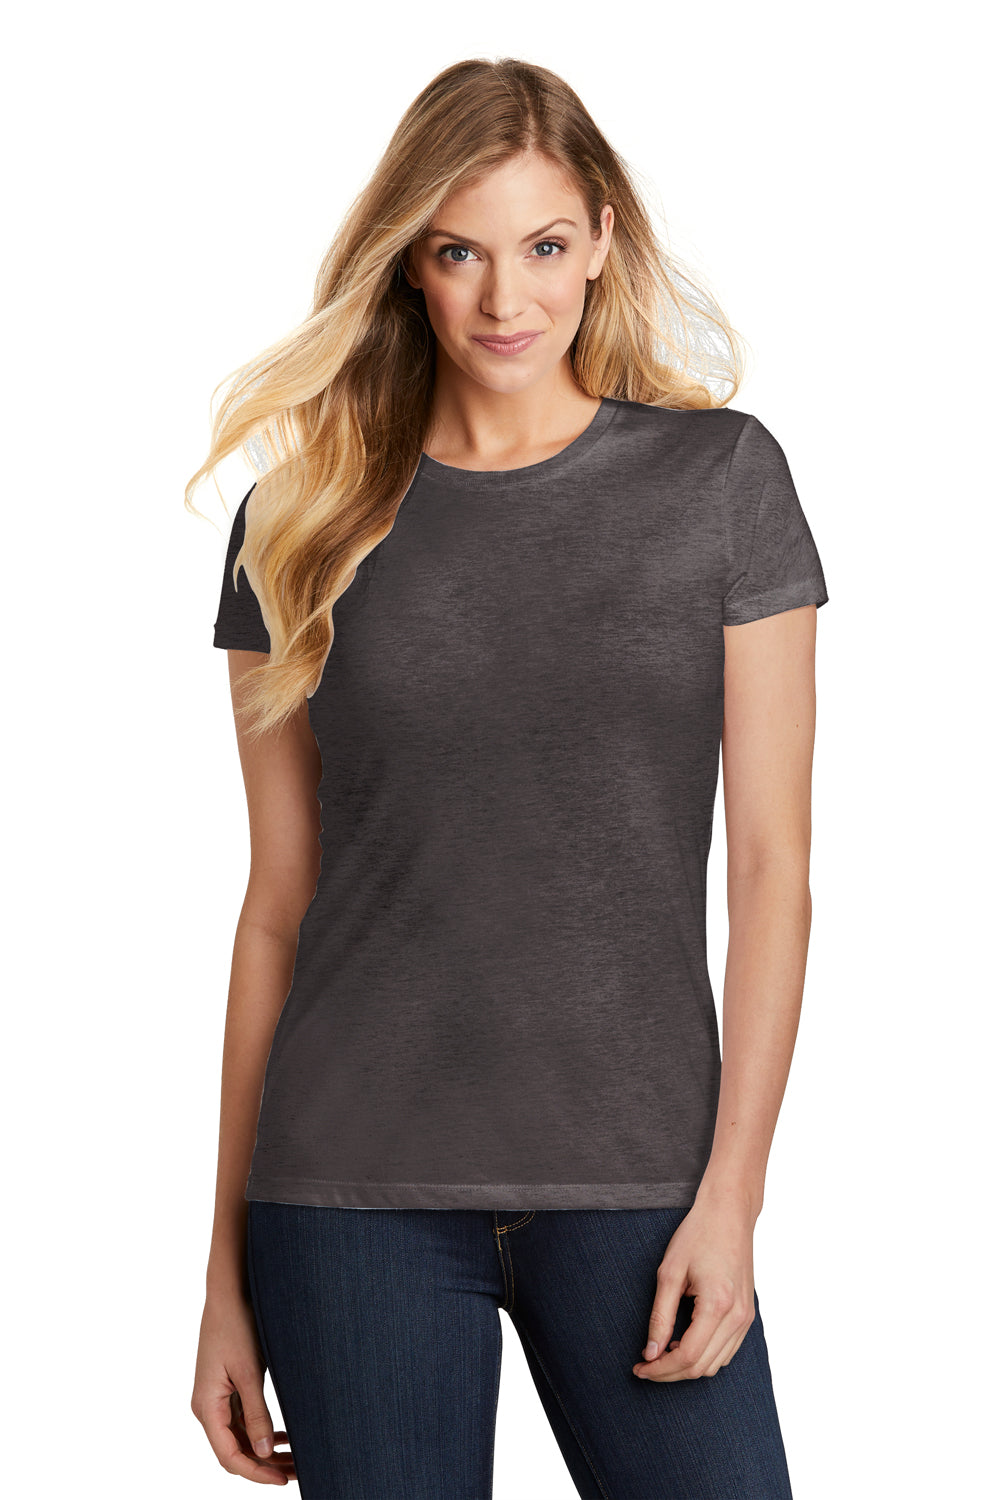 District DT155 Womens Fitted Perfect Tri Short Sleeve Crewneck T-Shirt Charcoal Grey Front